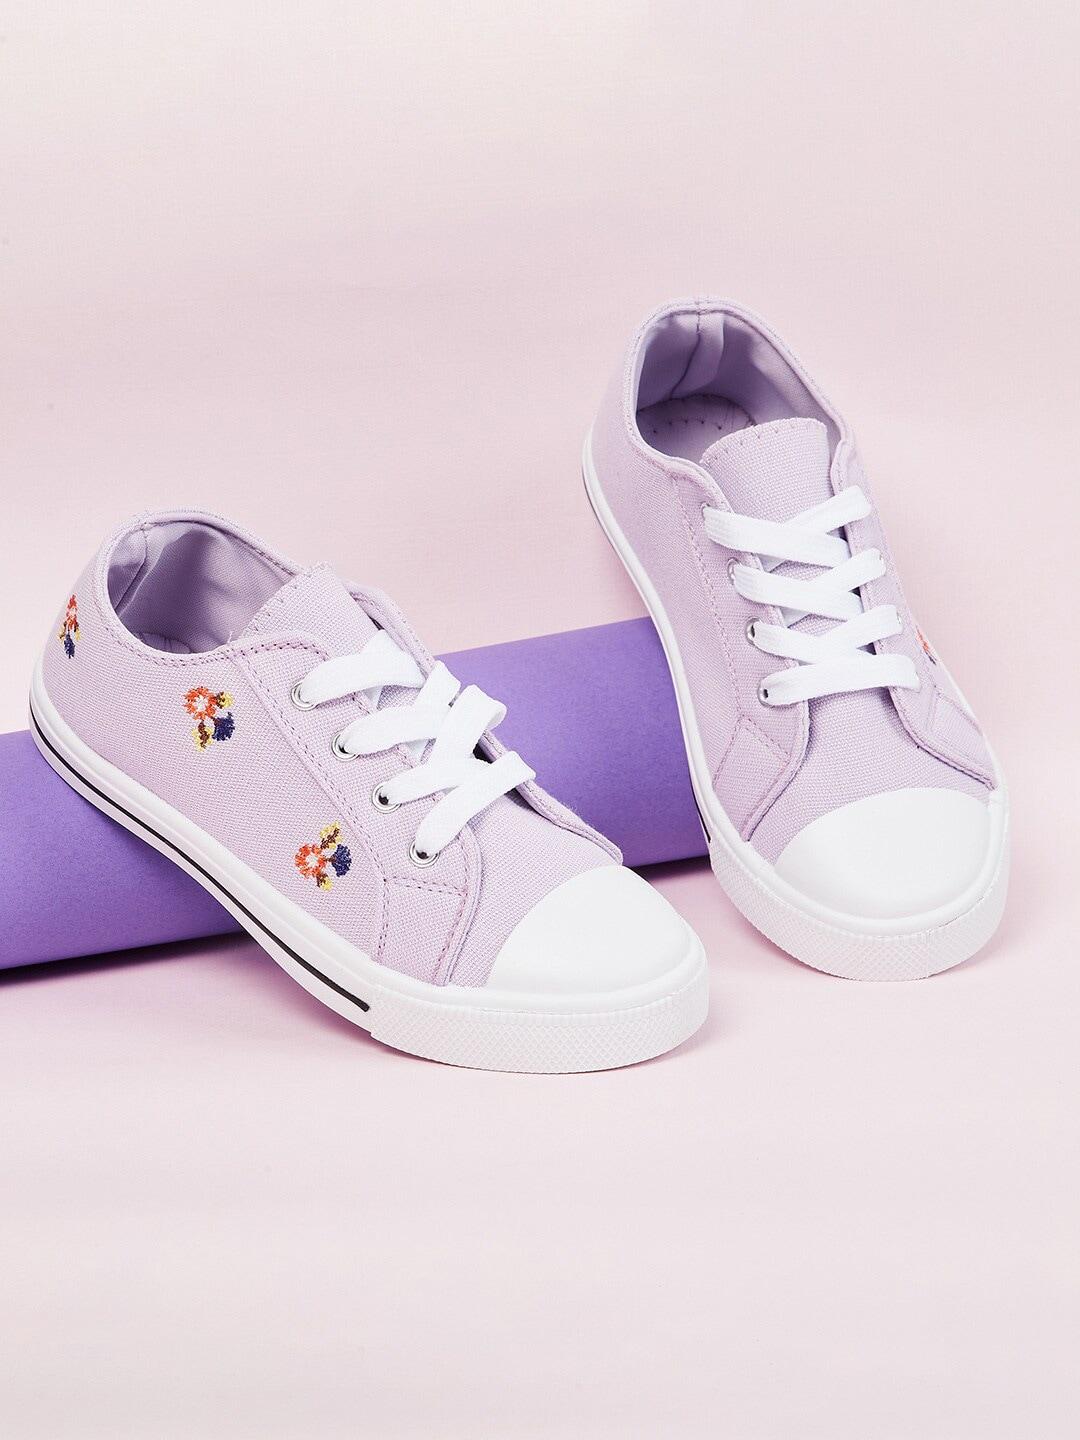 max Girls Printed Canvas Sneakers